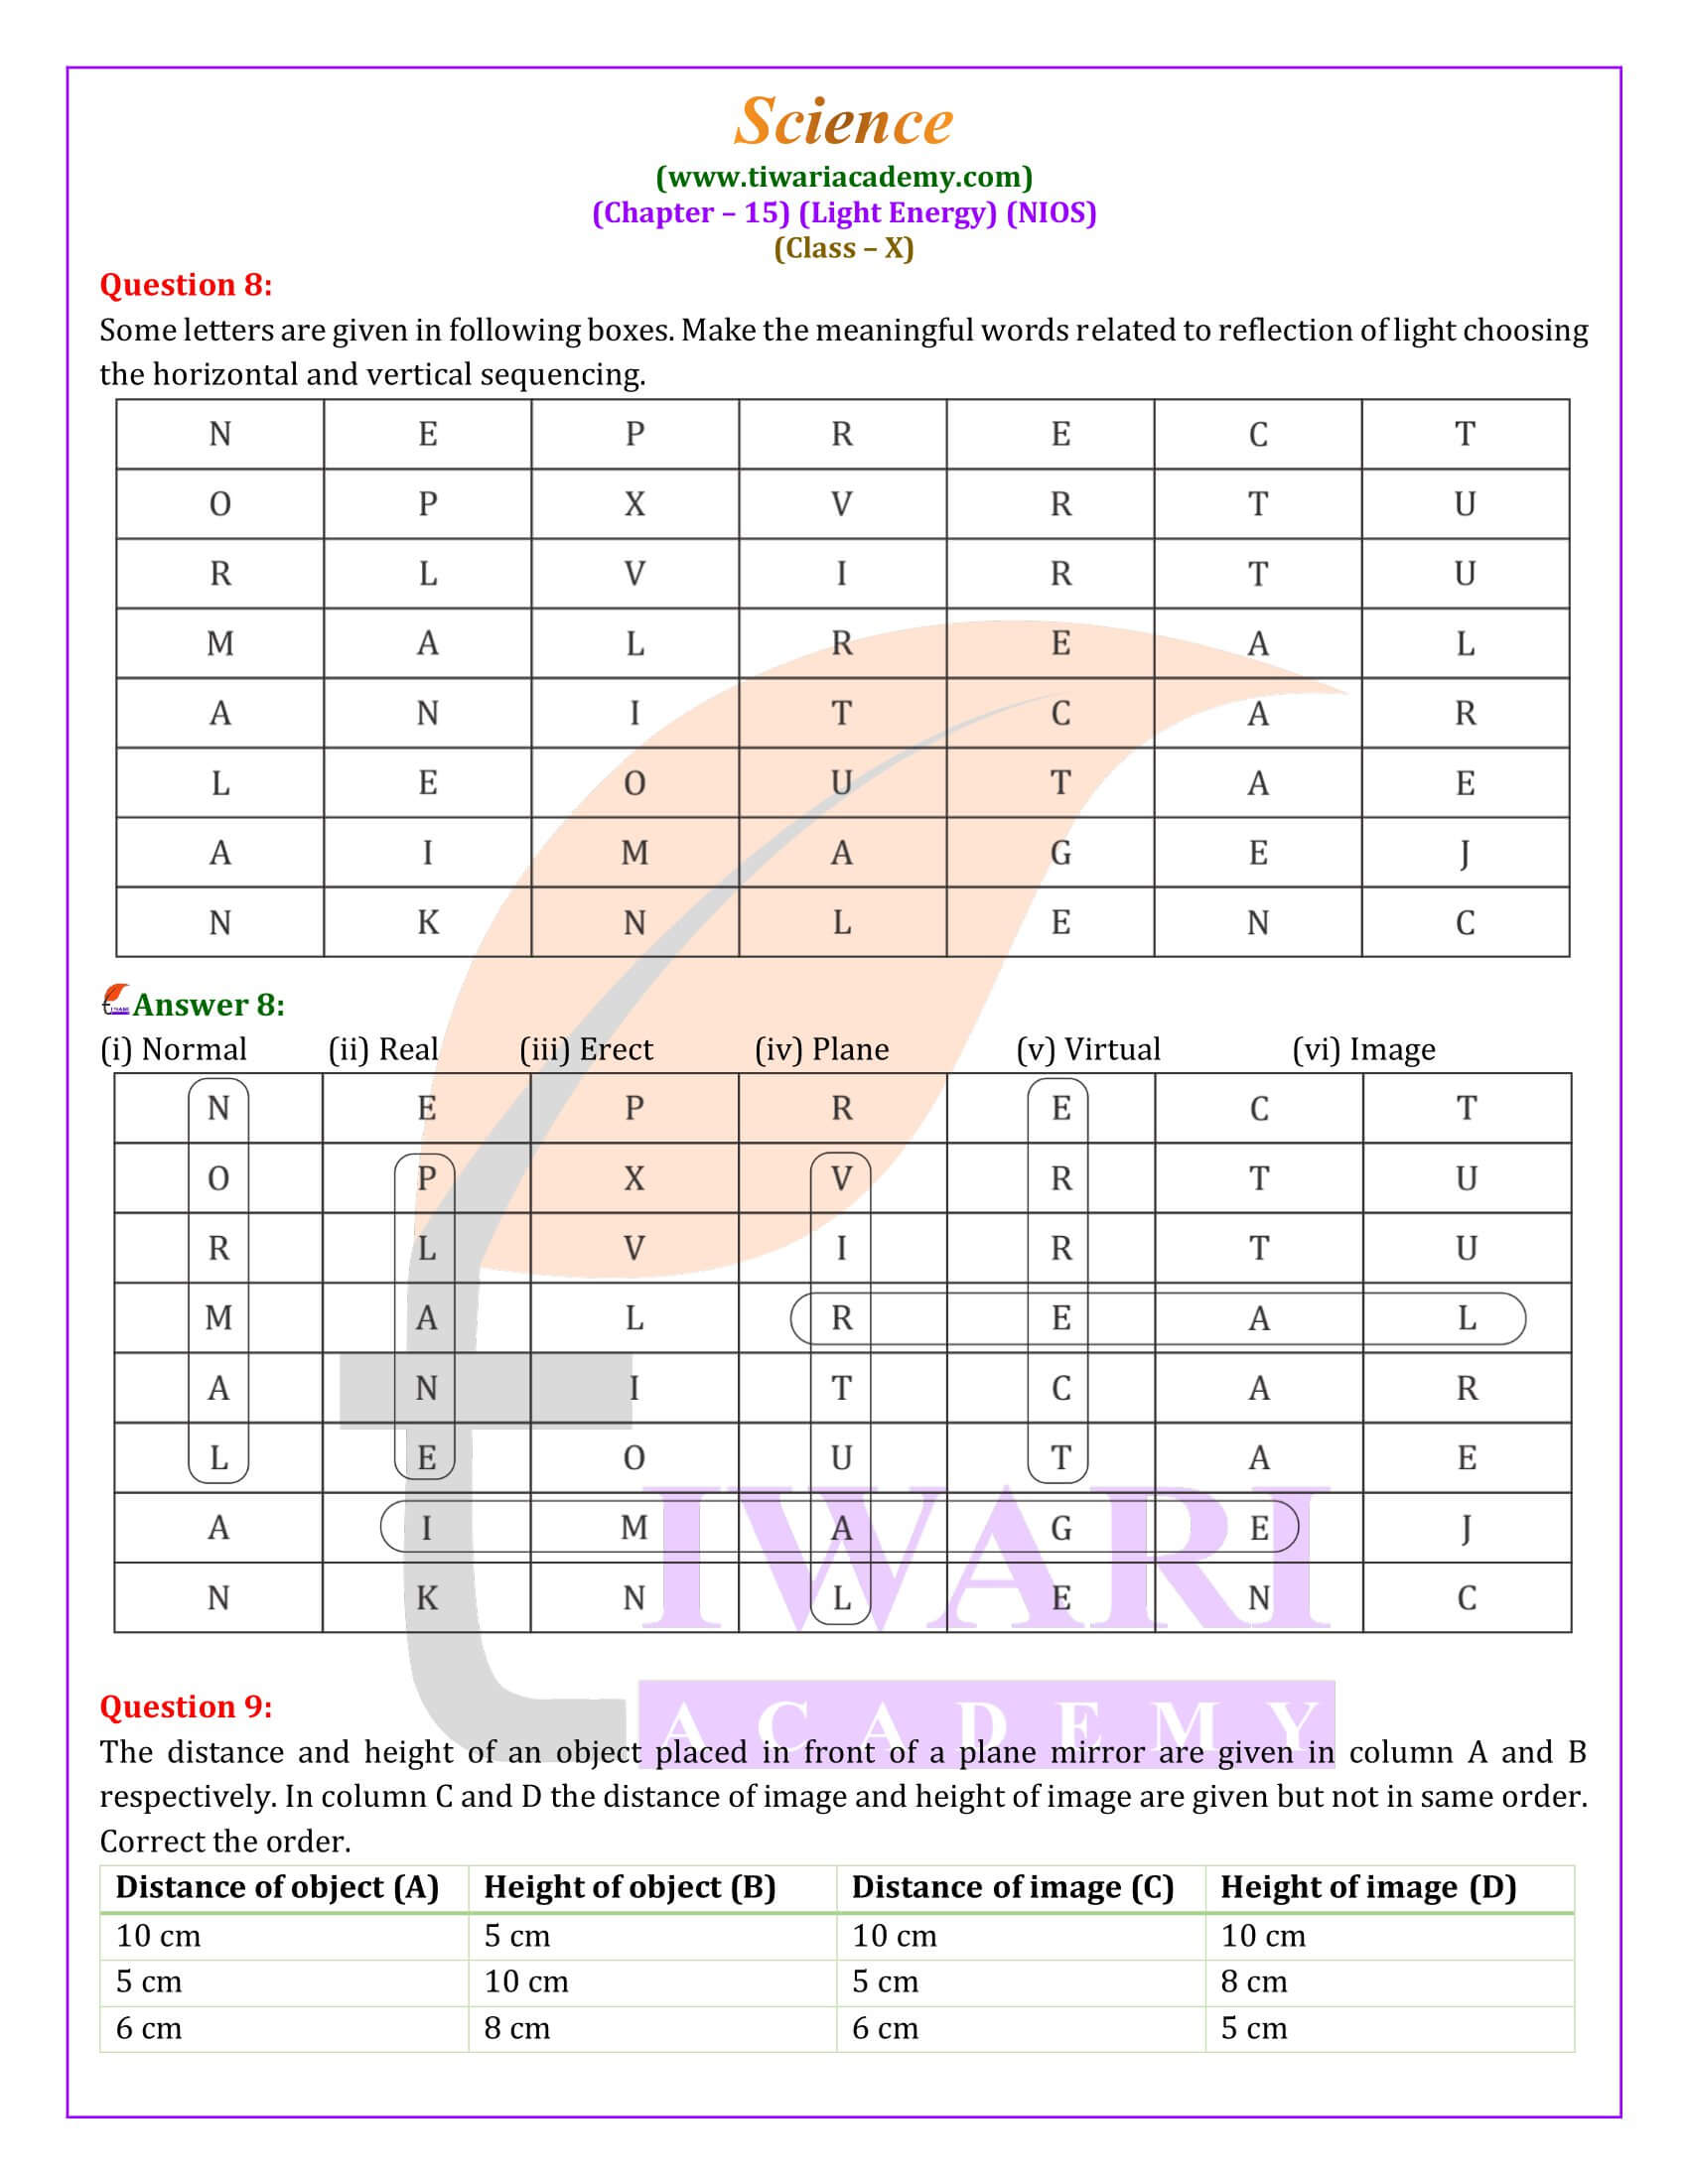 NIOS Class 10 Science Chapter 15 Light Energy Guide